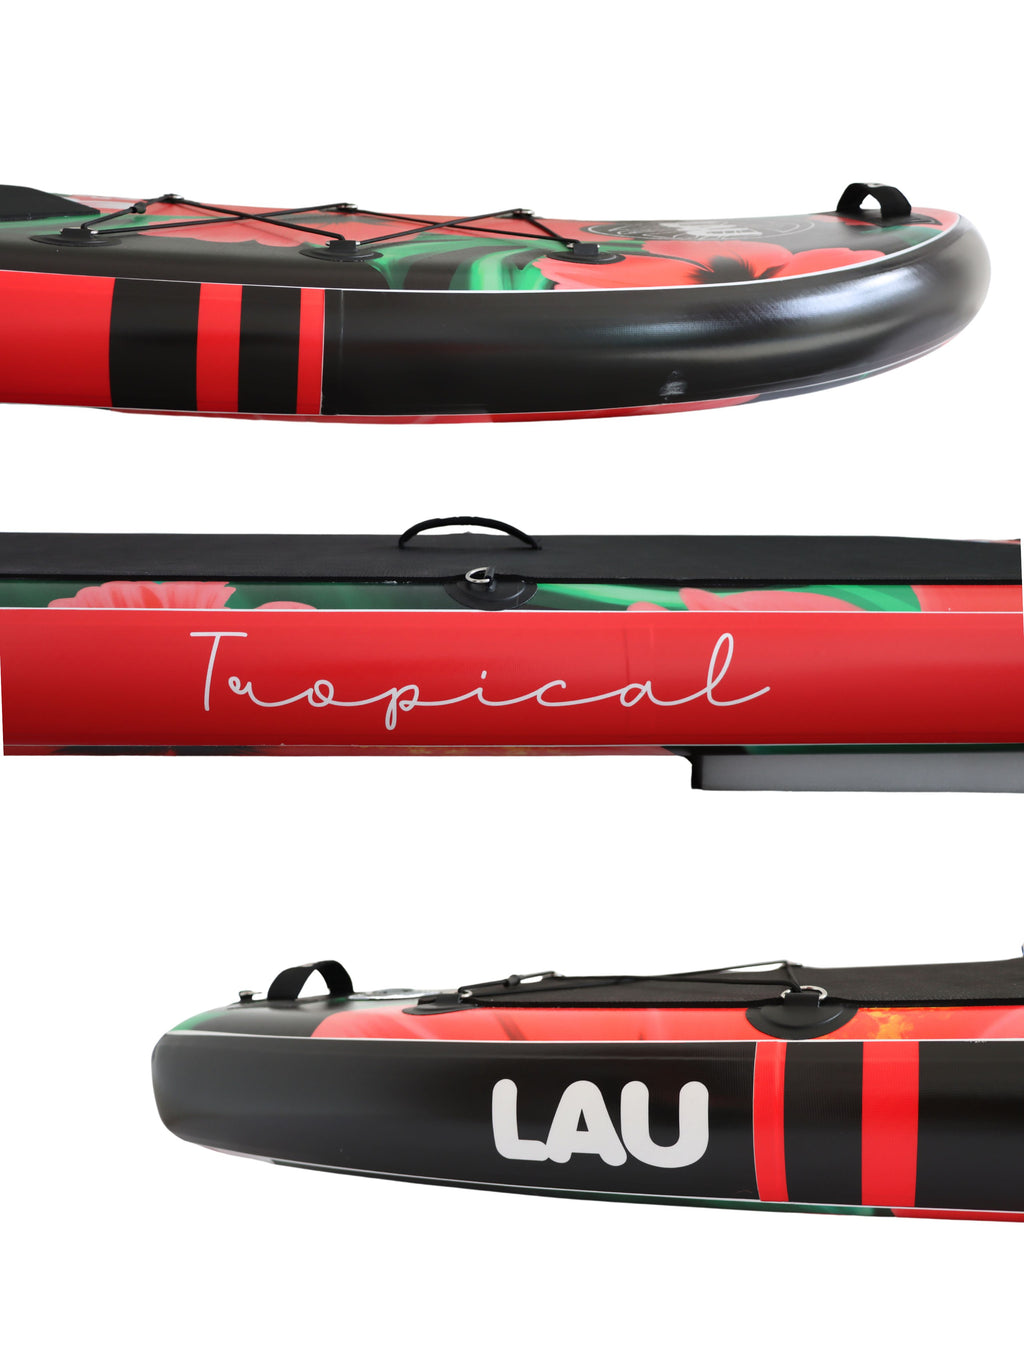 Tropical- 11'6 All-around- inflatable paddle board